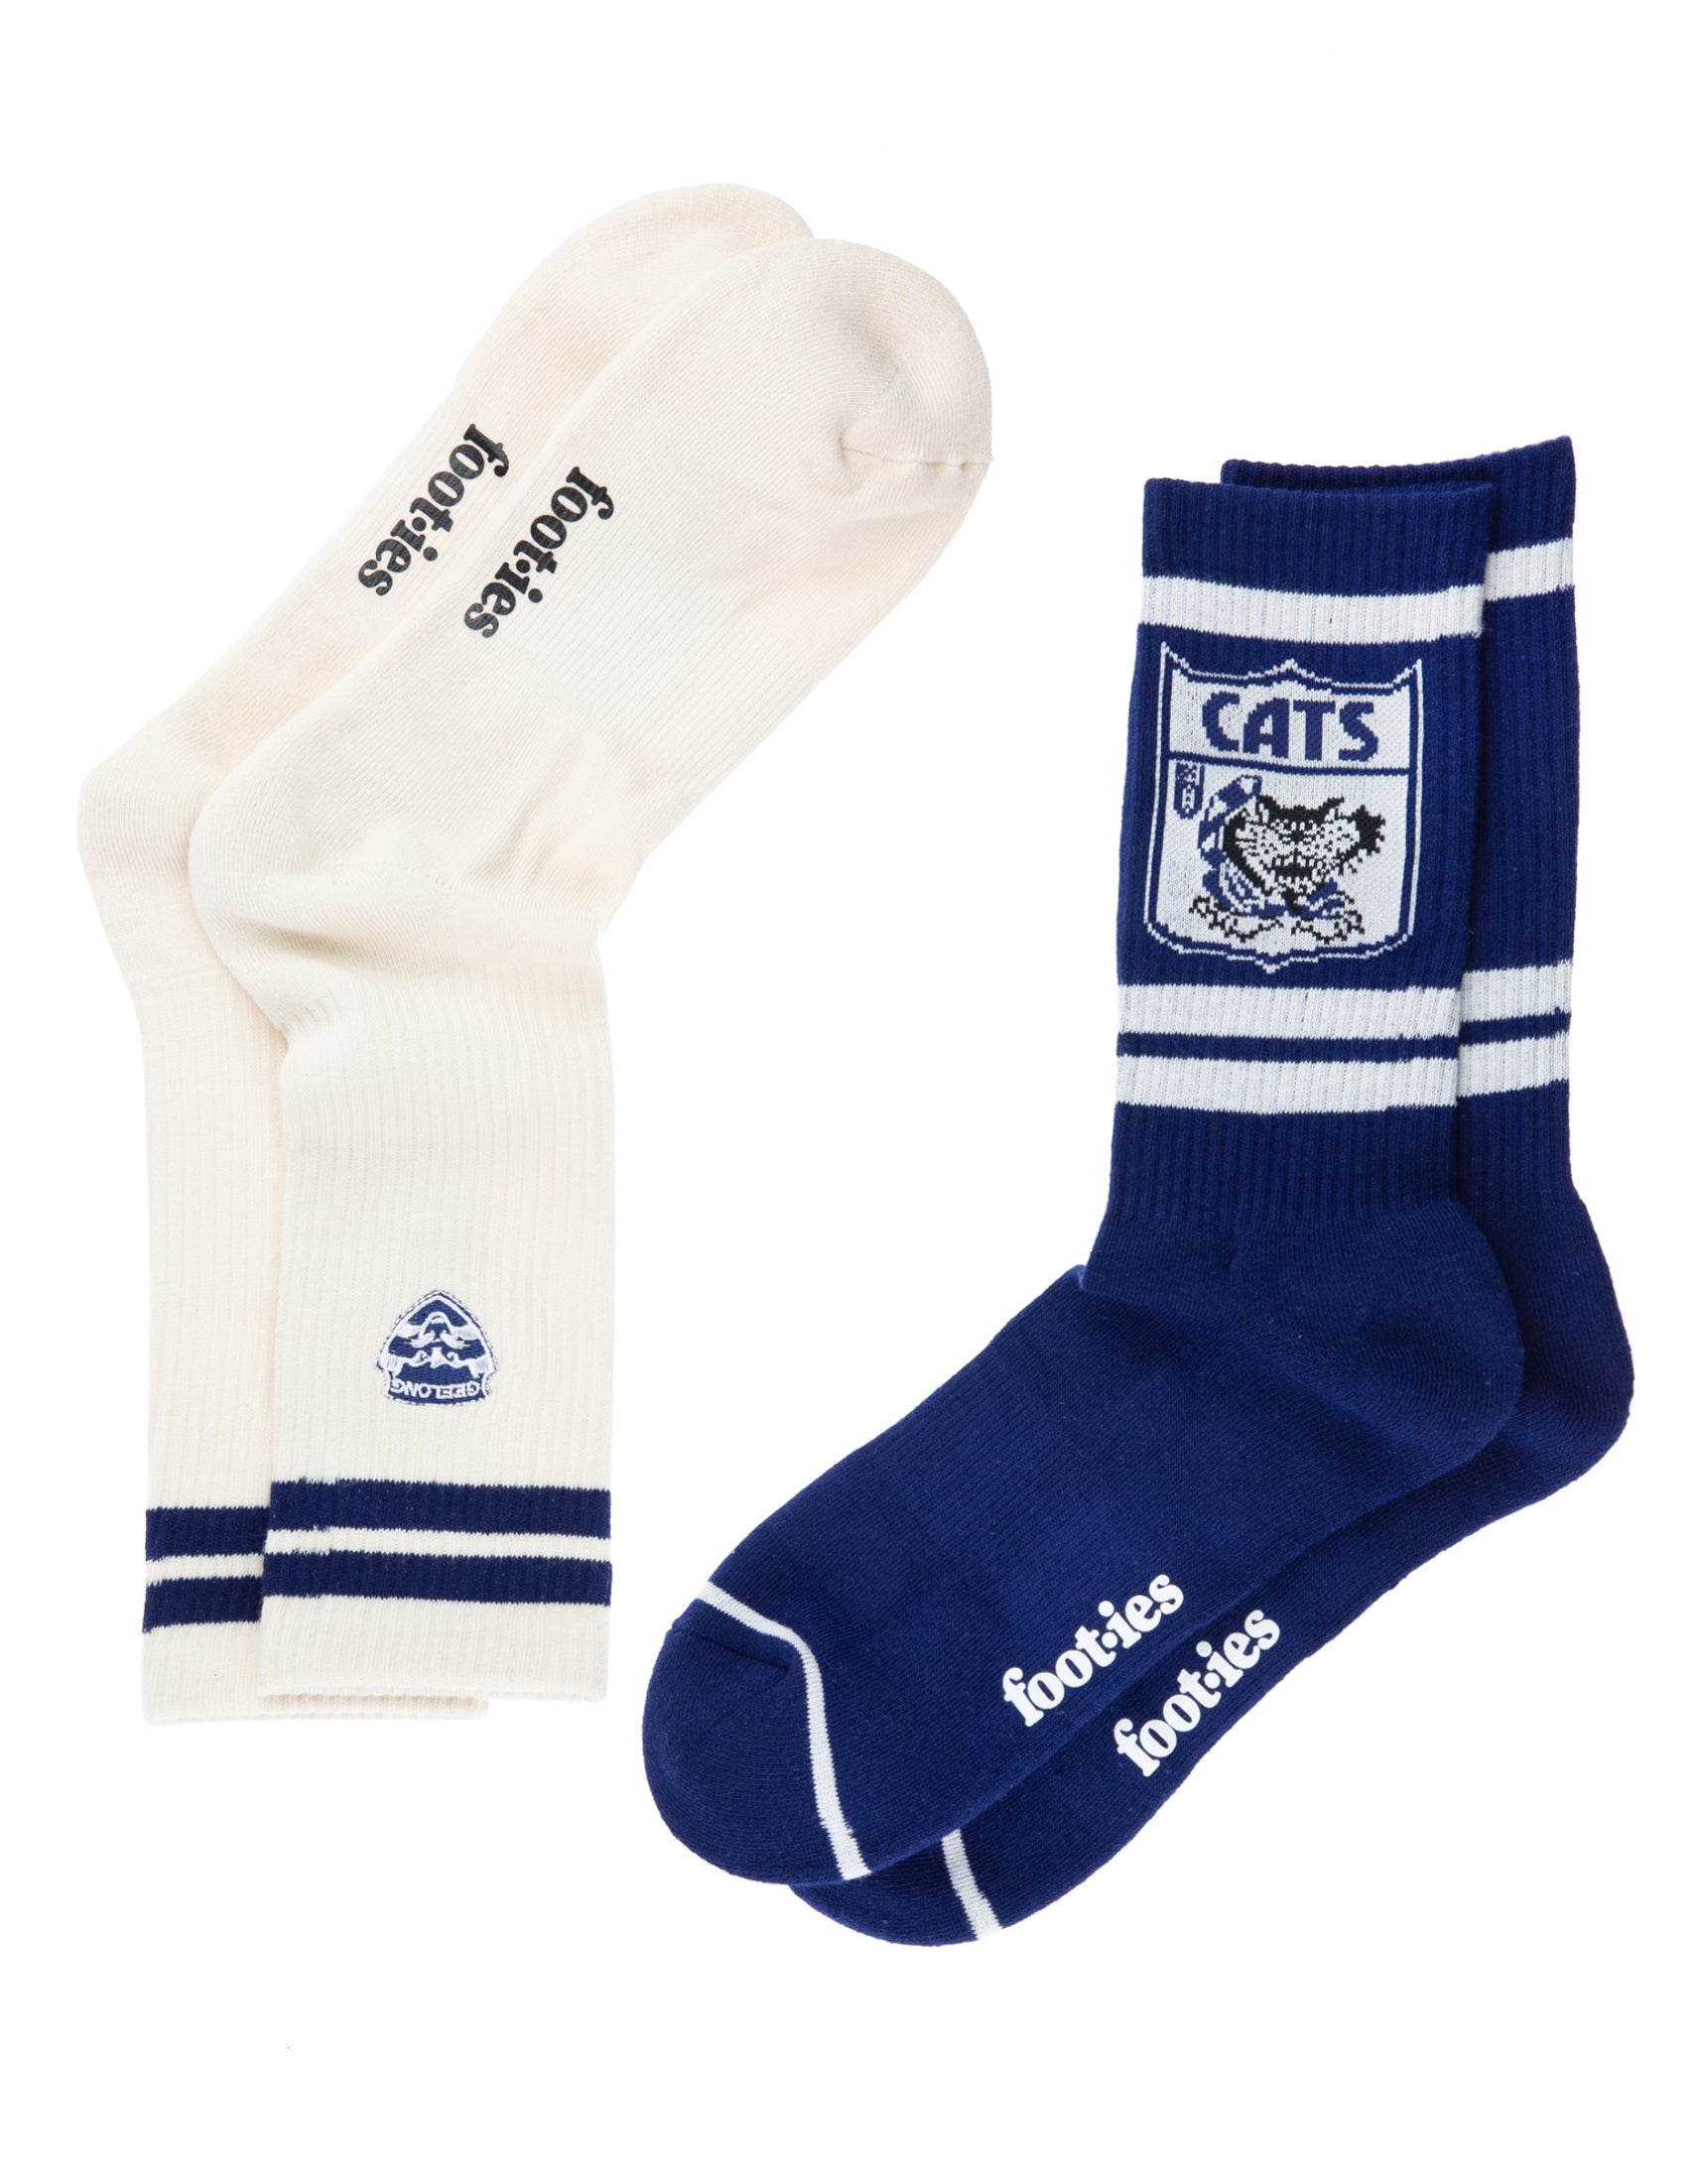 Geelong Cats Icons Sneaker Socks 2 Pack